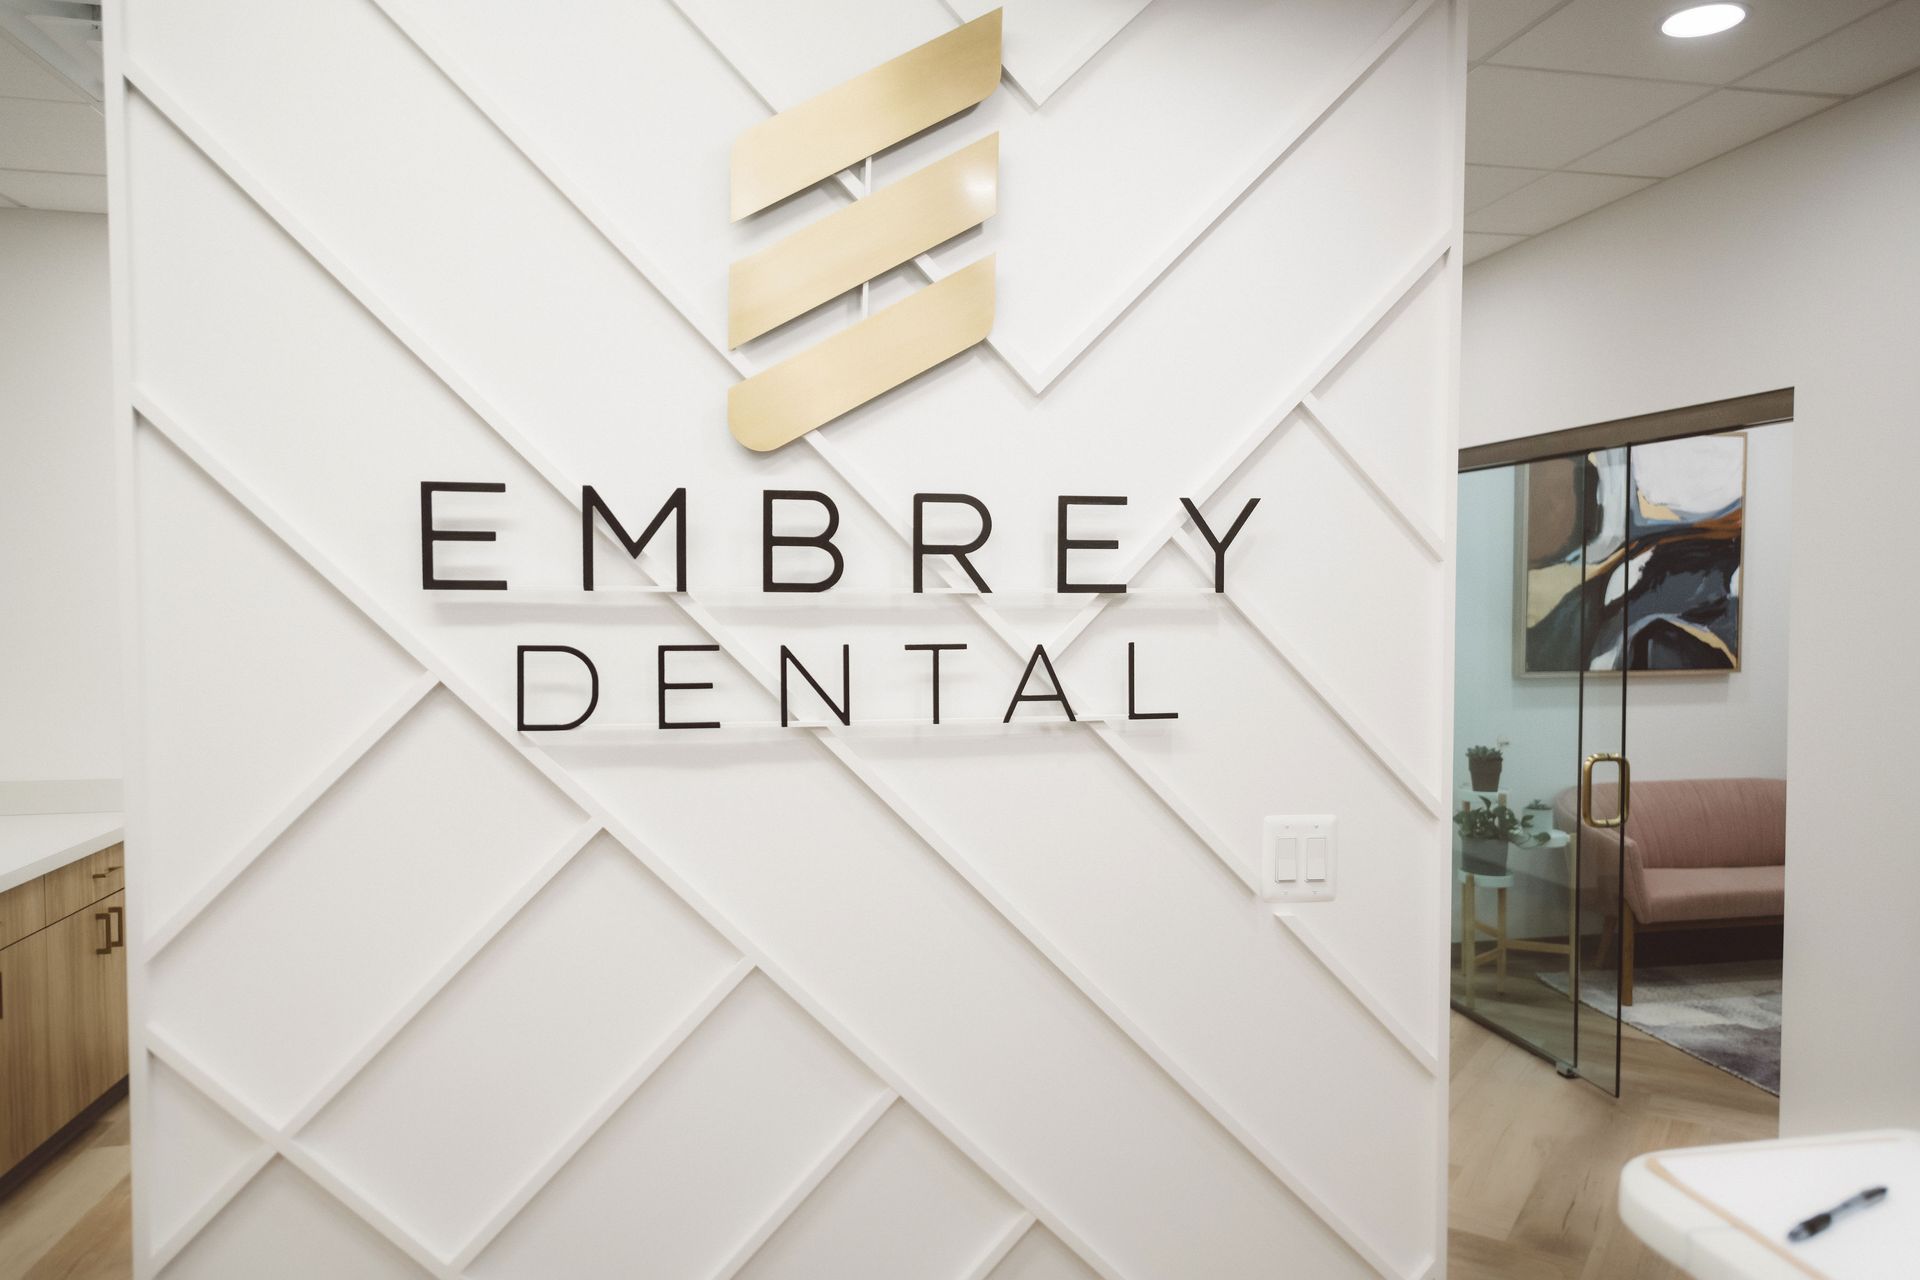 embrey dental logo and front office background